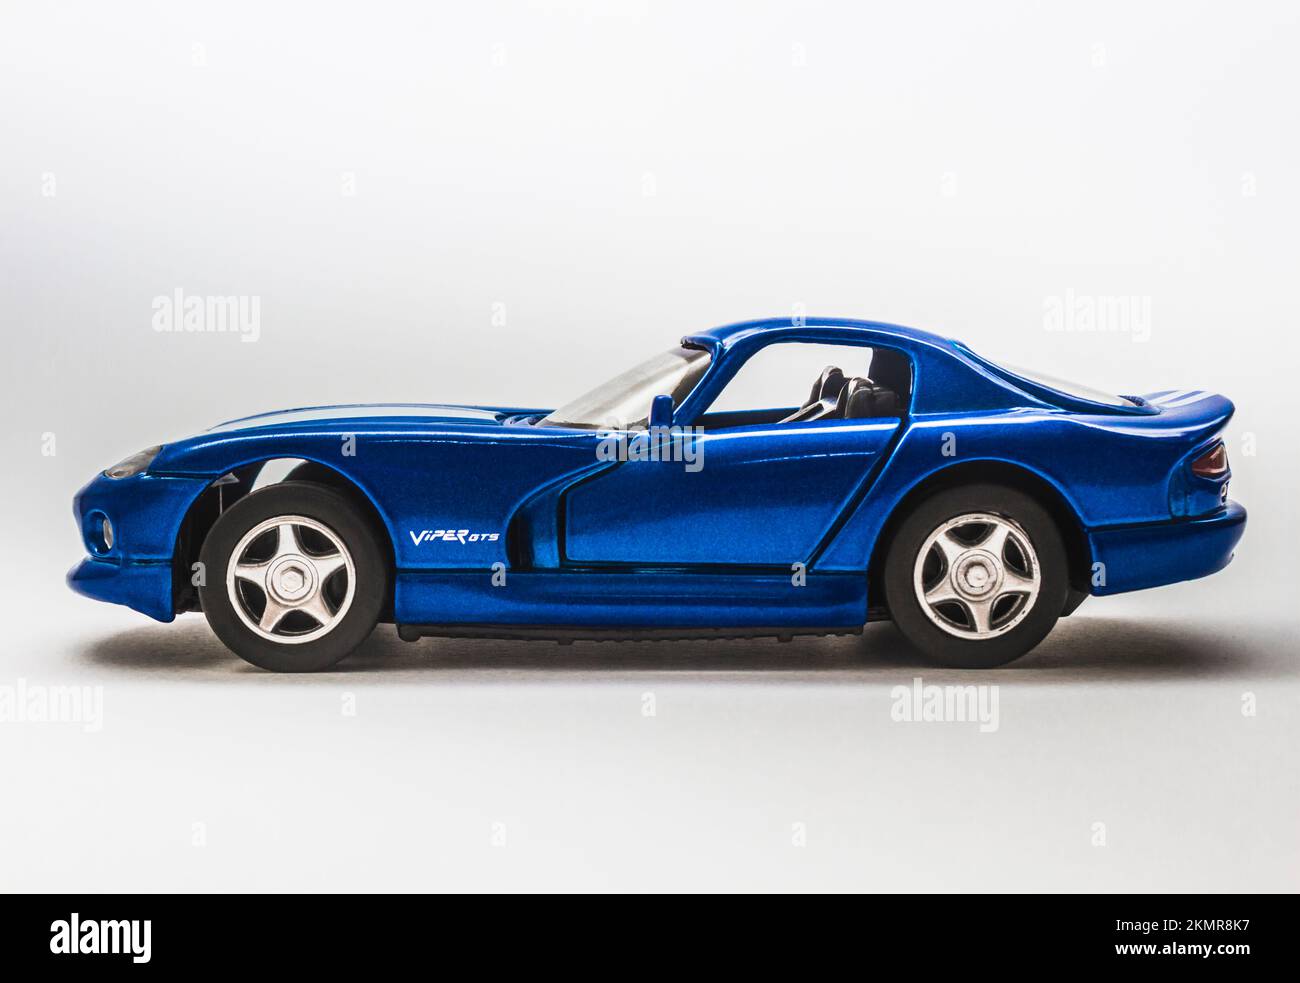 Modern auto design on a Dodge Viper GTS model car captured side on in studio composition. In race blue Stock Photo